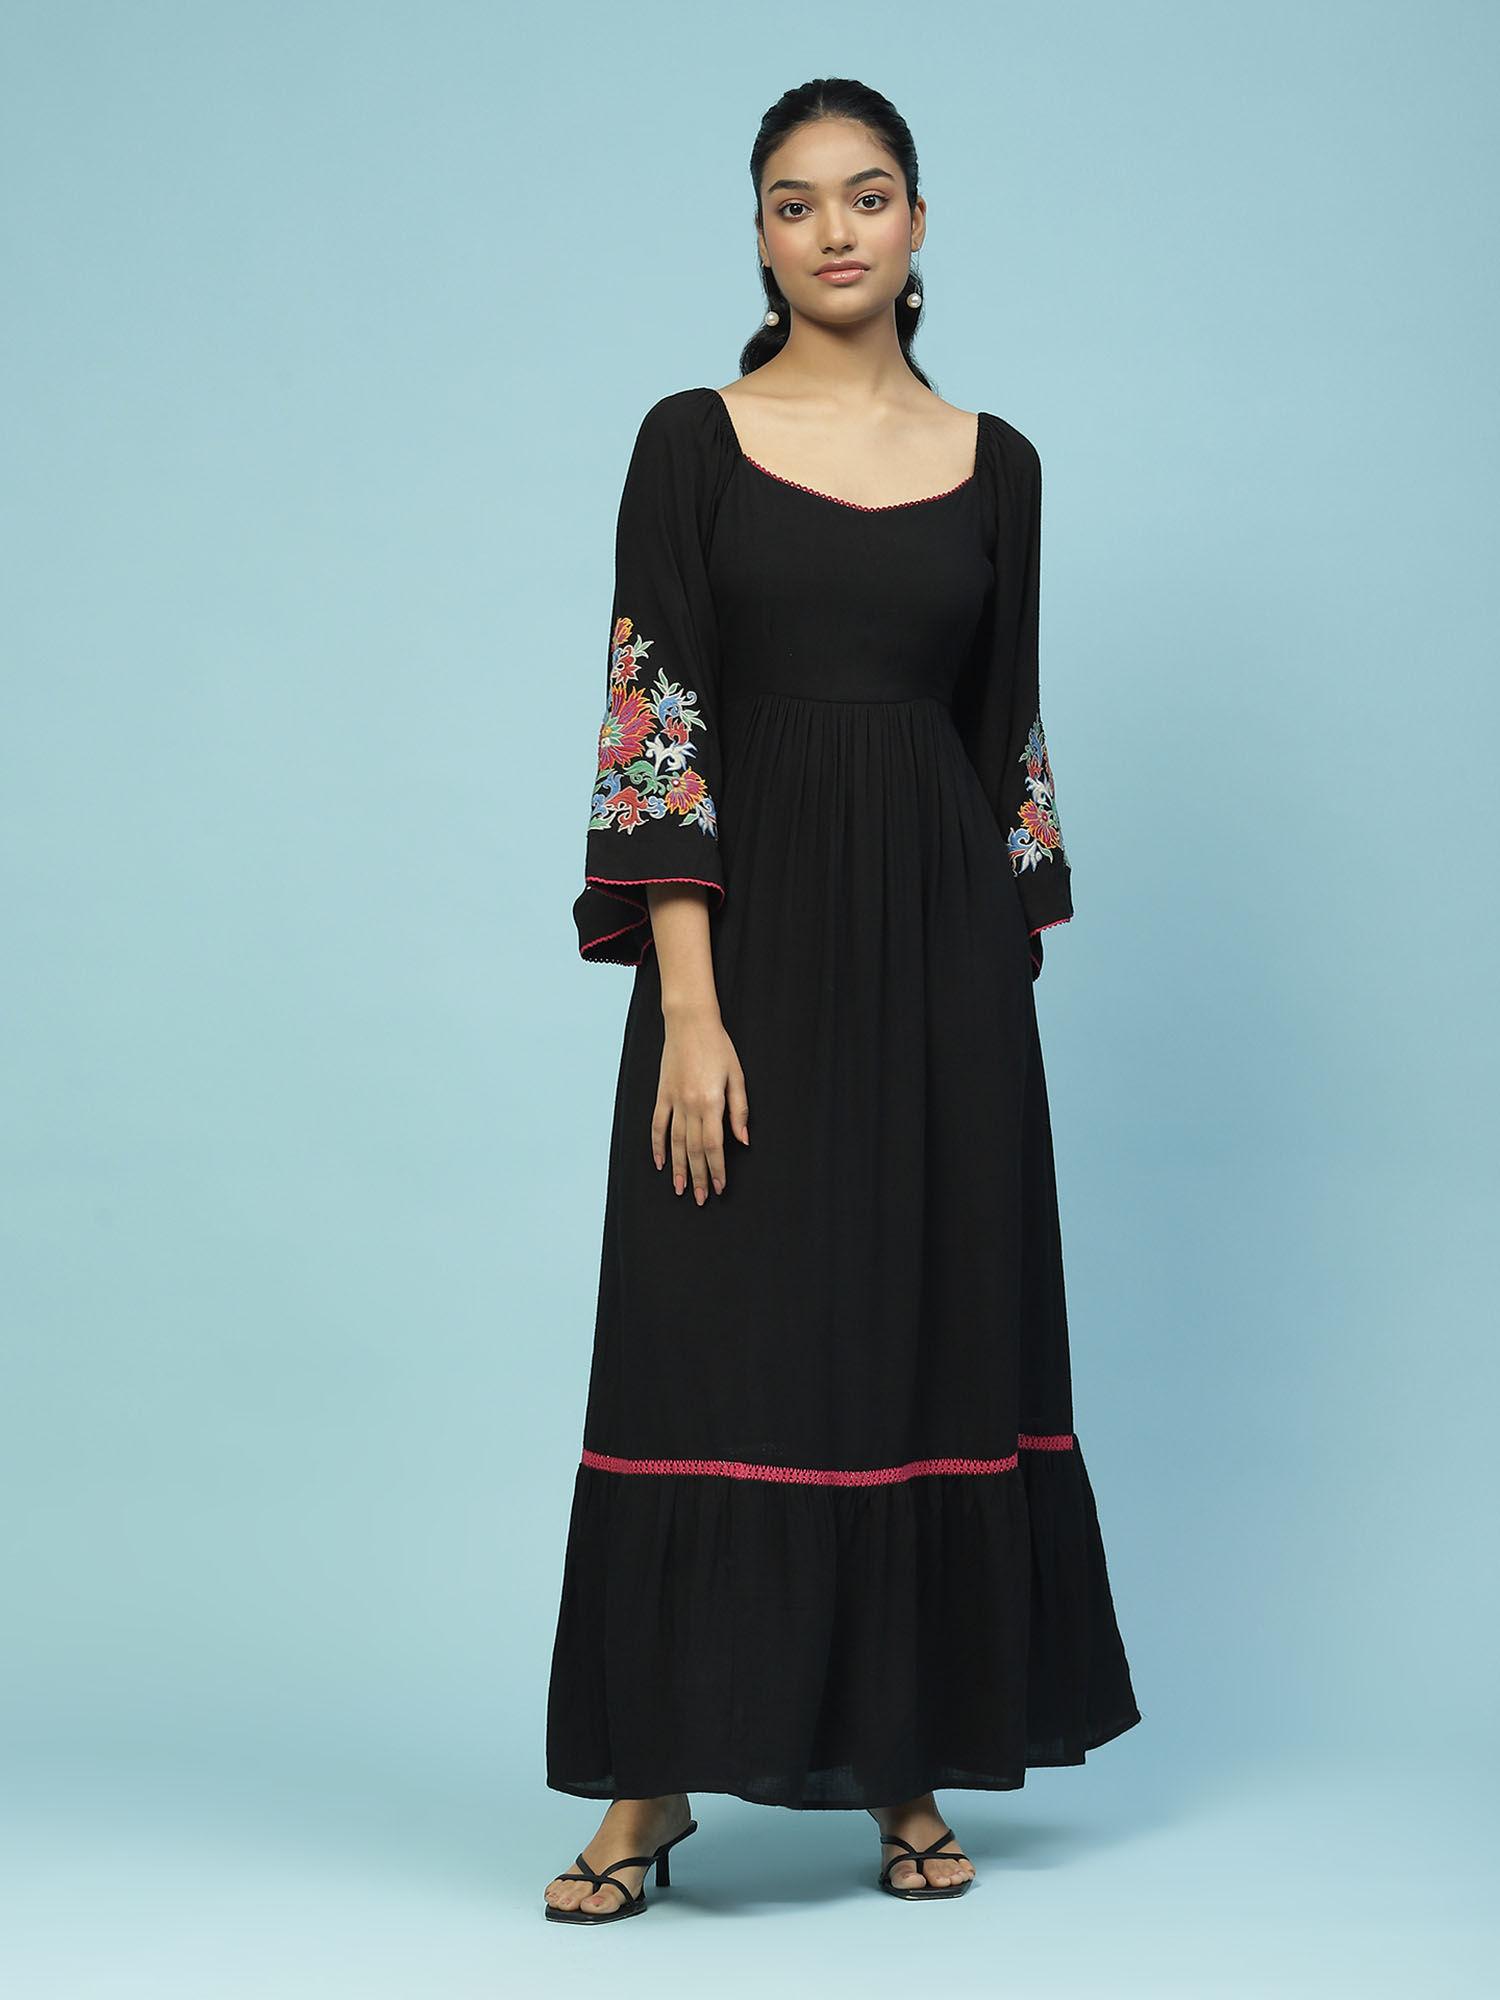 black embroidered maxi dress